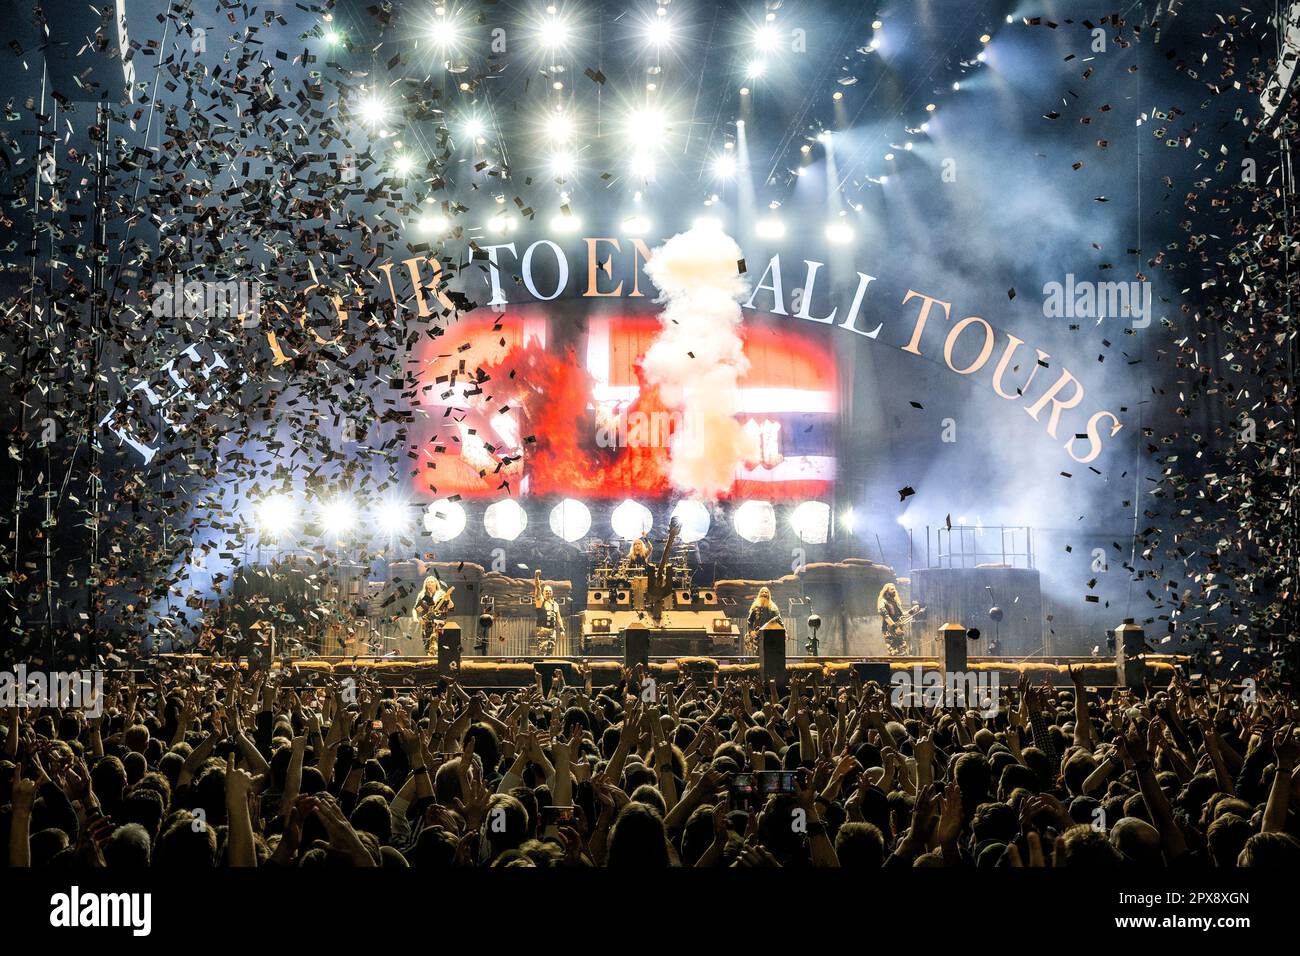 Sabaton - This is THE TOUR TO END ALL TOURS! All dates and